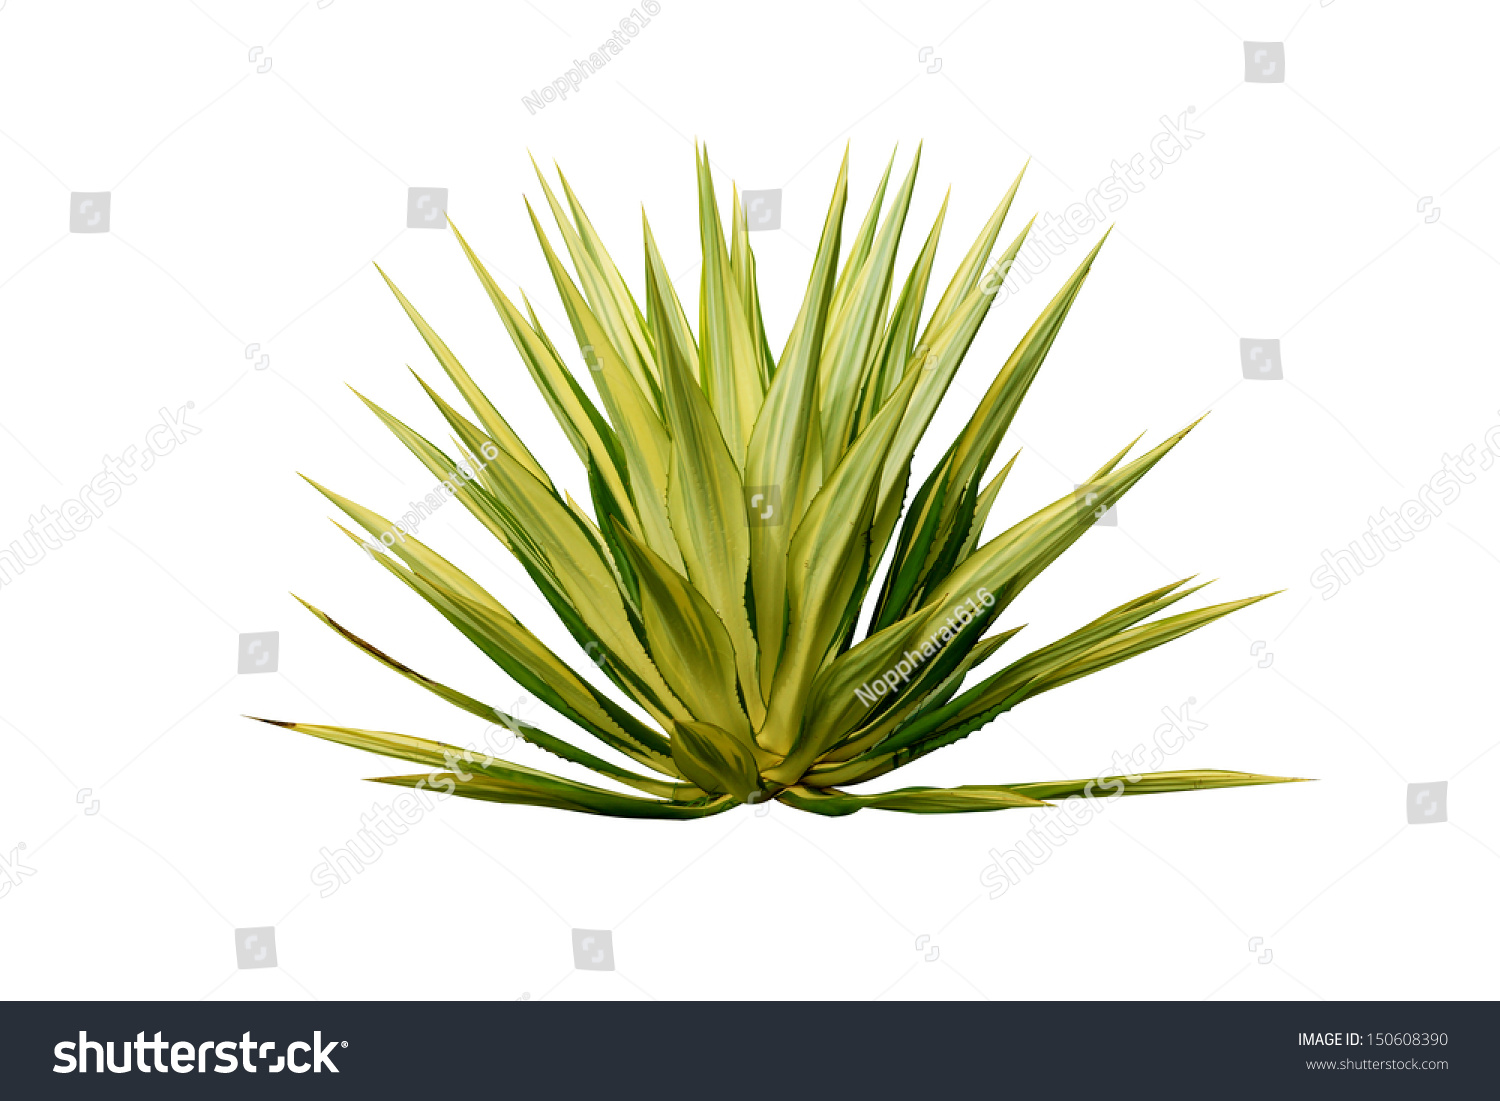 Agave plant isolated on white background. #150608390